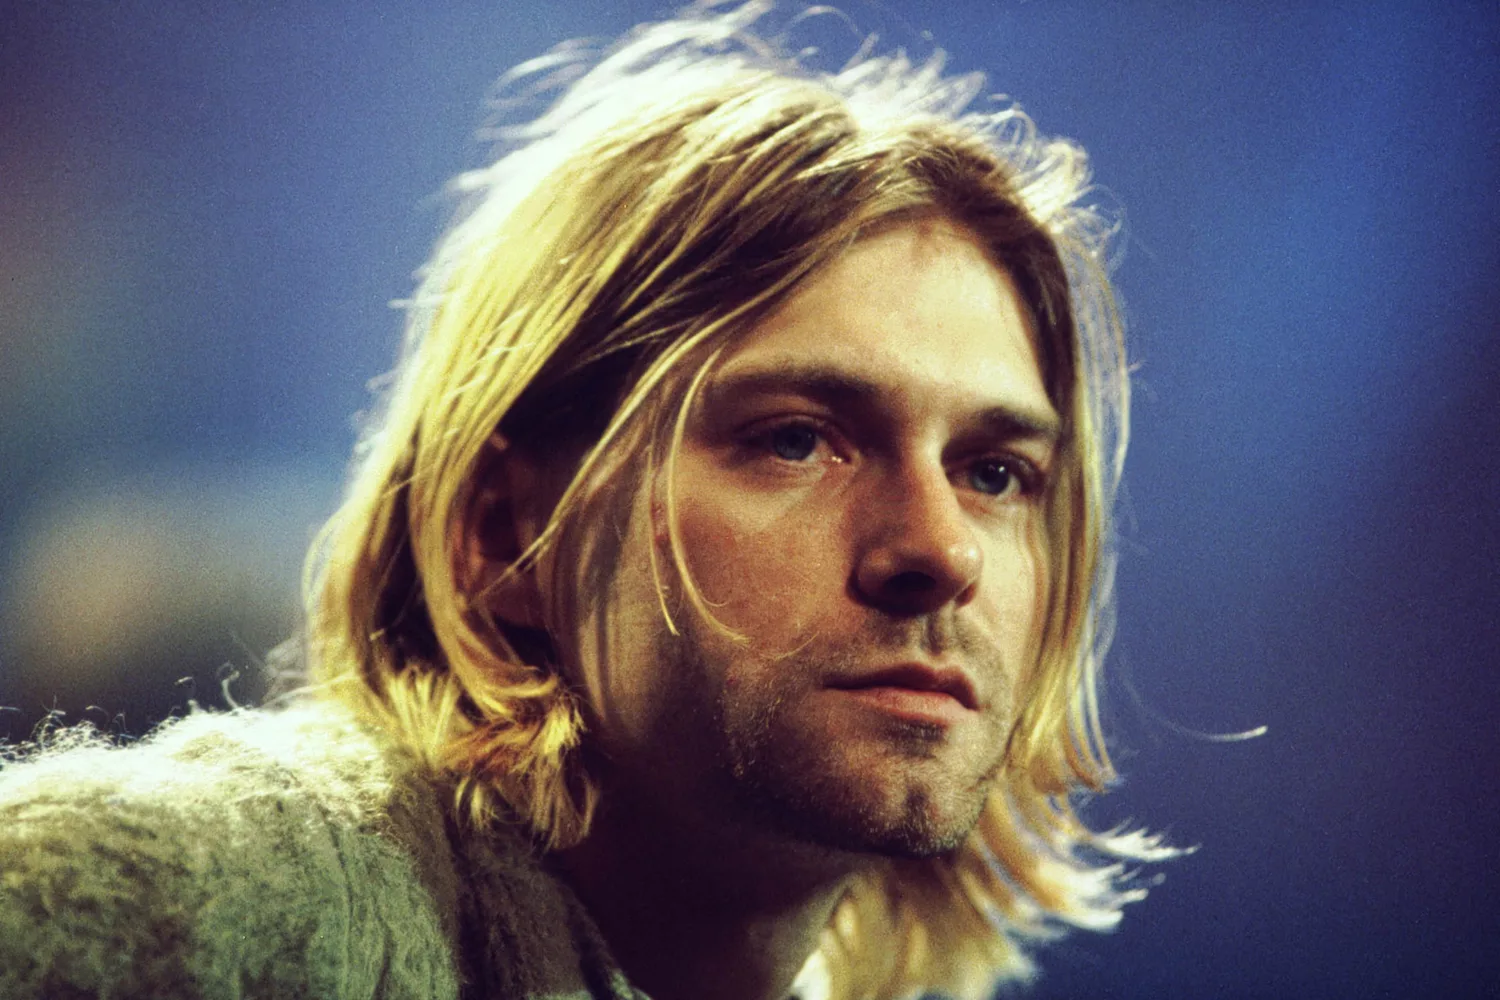 Unheard Kurt Cobain track to feature on ‘Montage of Heck’ soundtrack